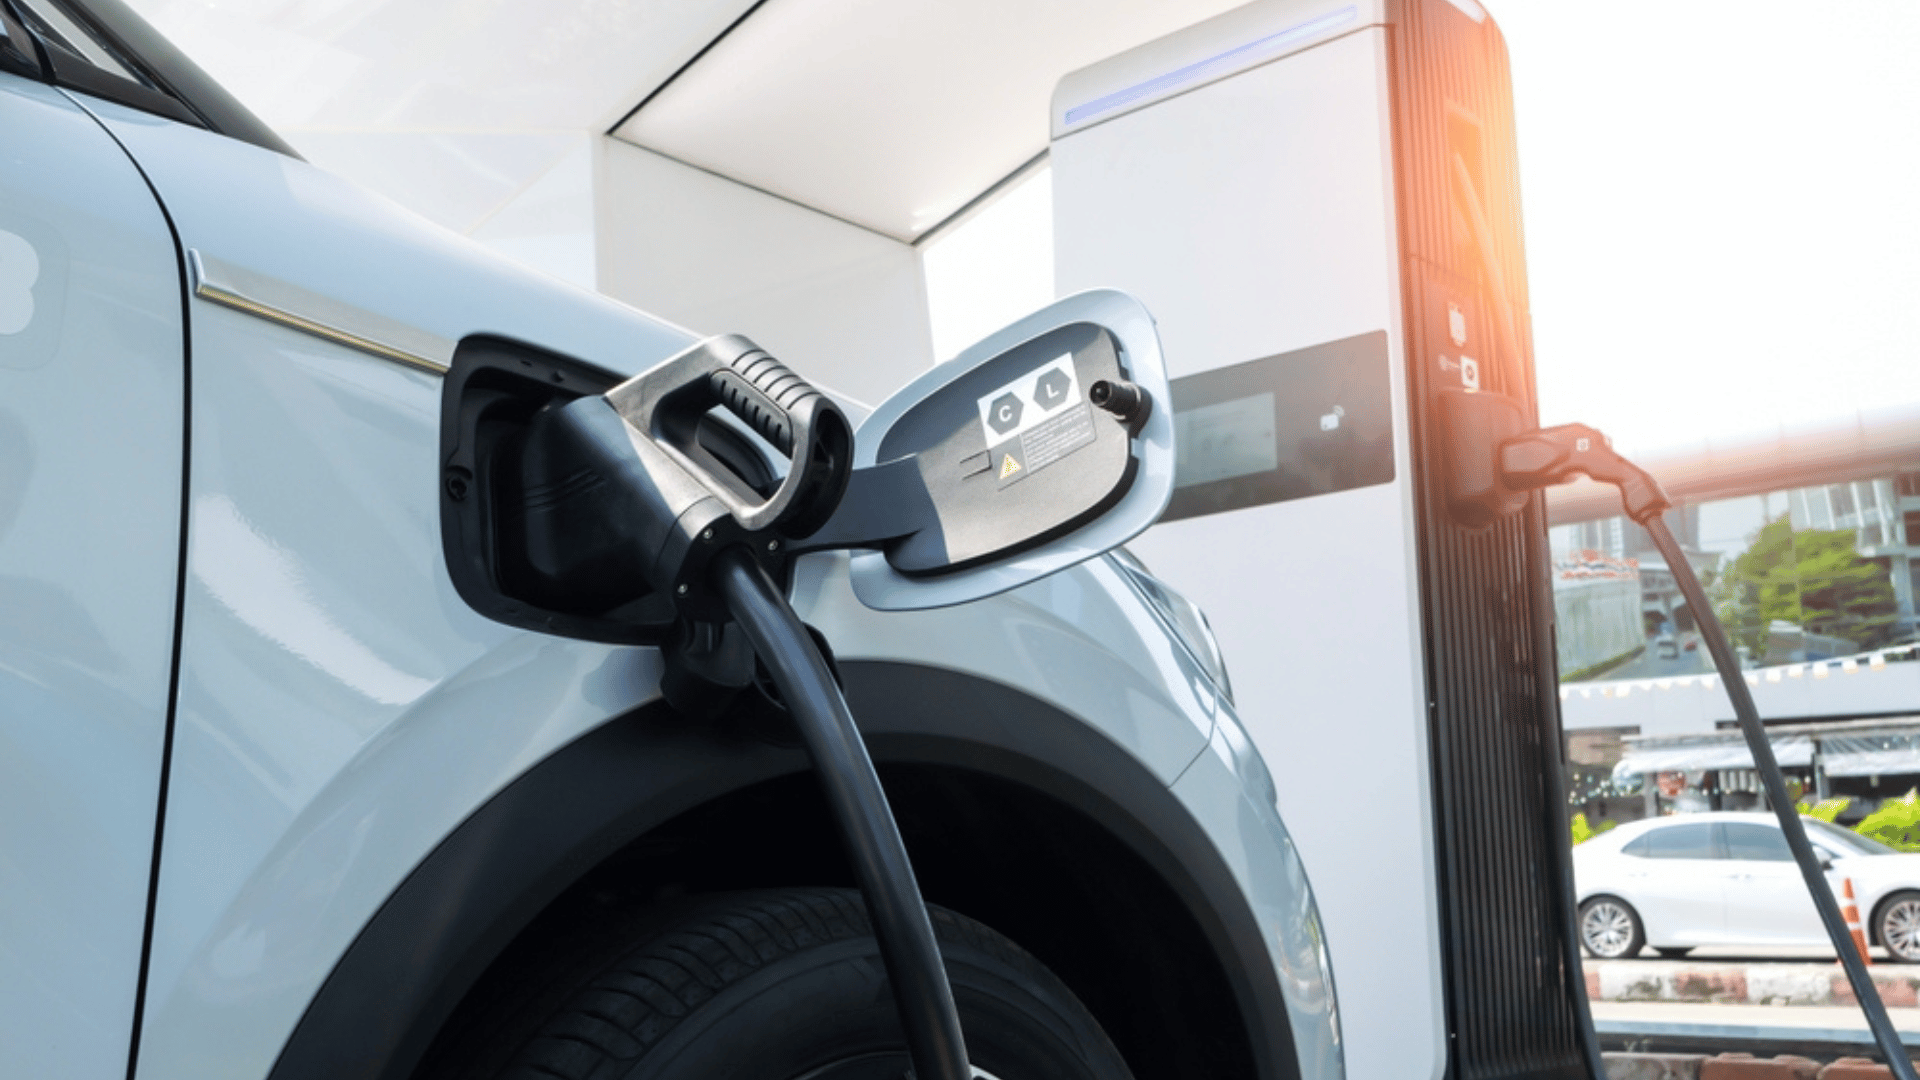 How AI Could Make EV Charging More Energy-Efficient